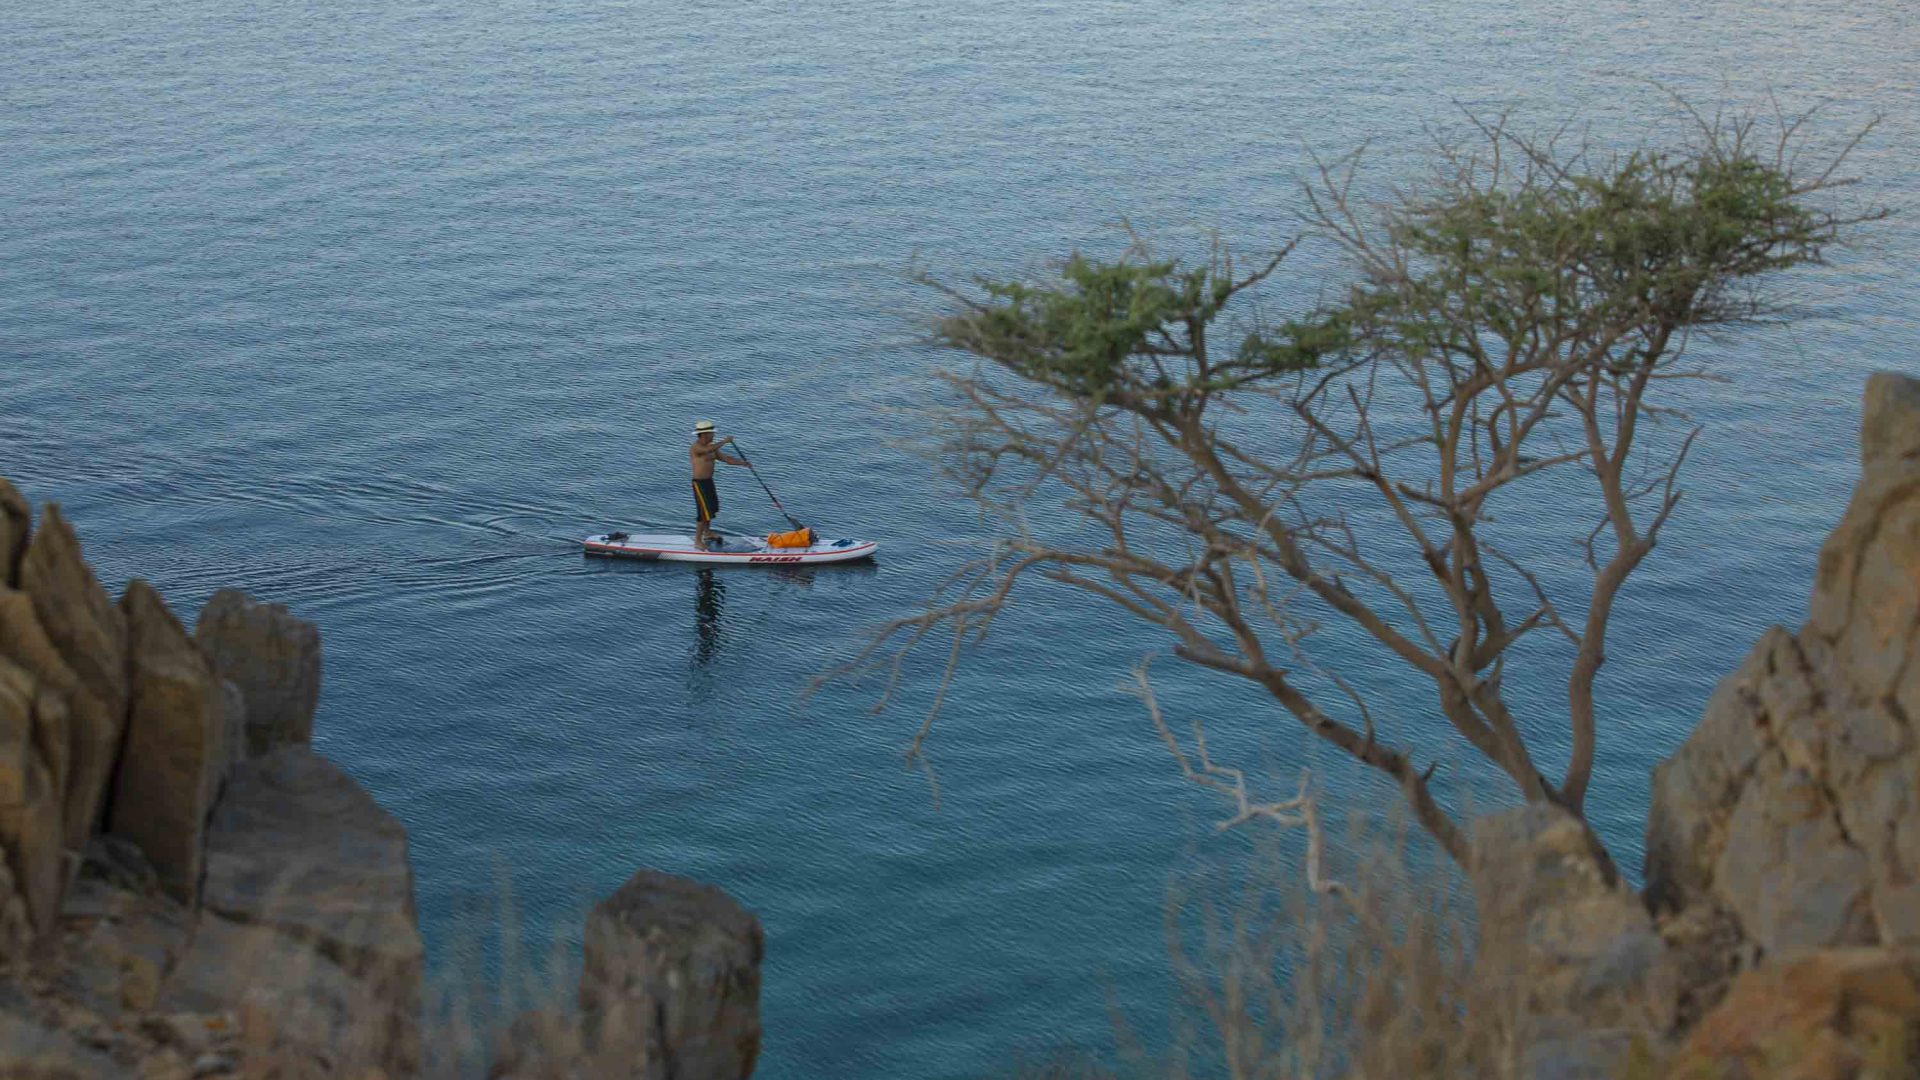 A solo paddle boarder can be seen through trees and rocks.